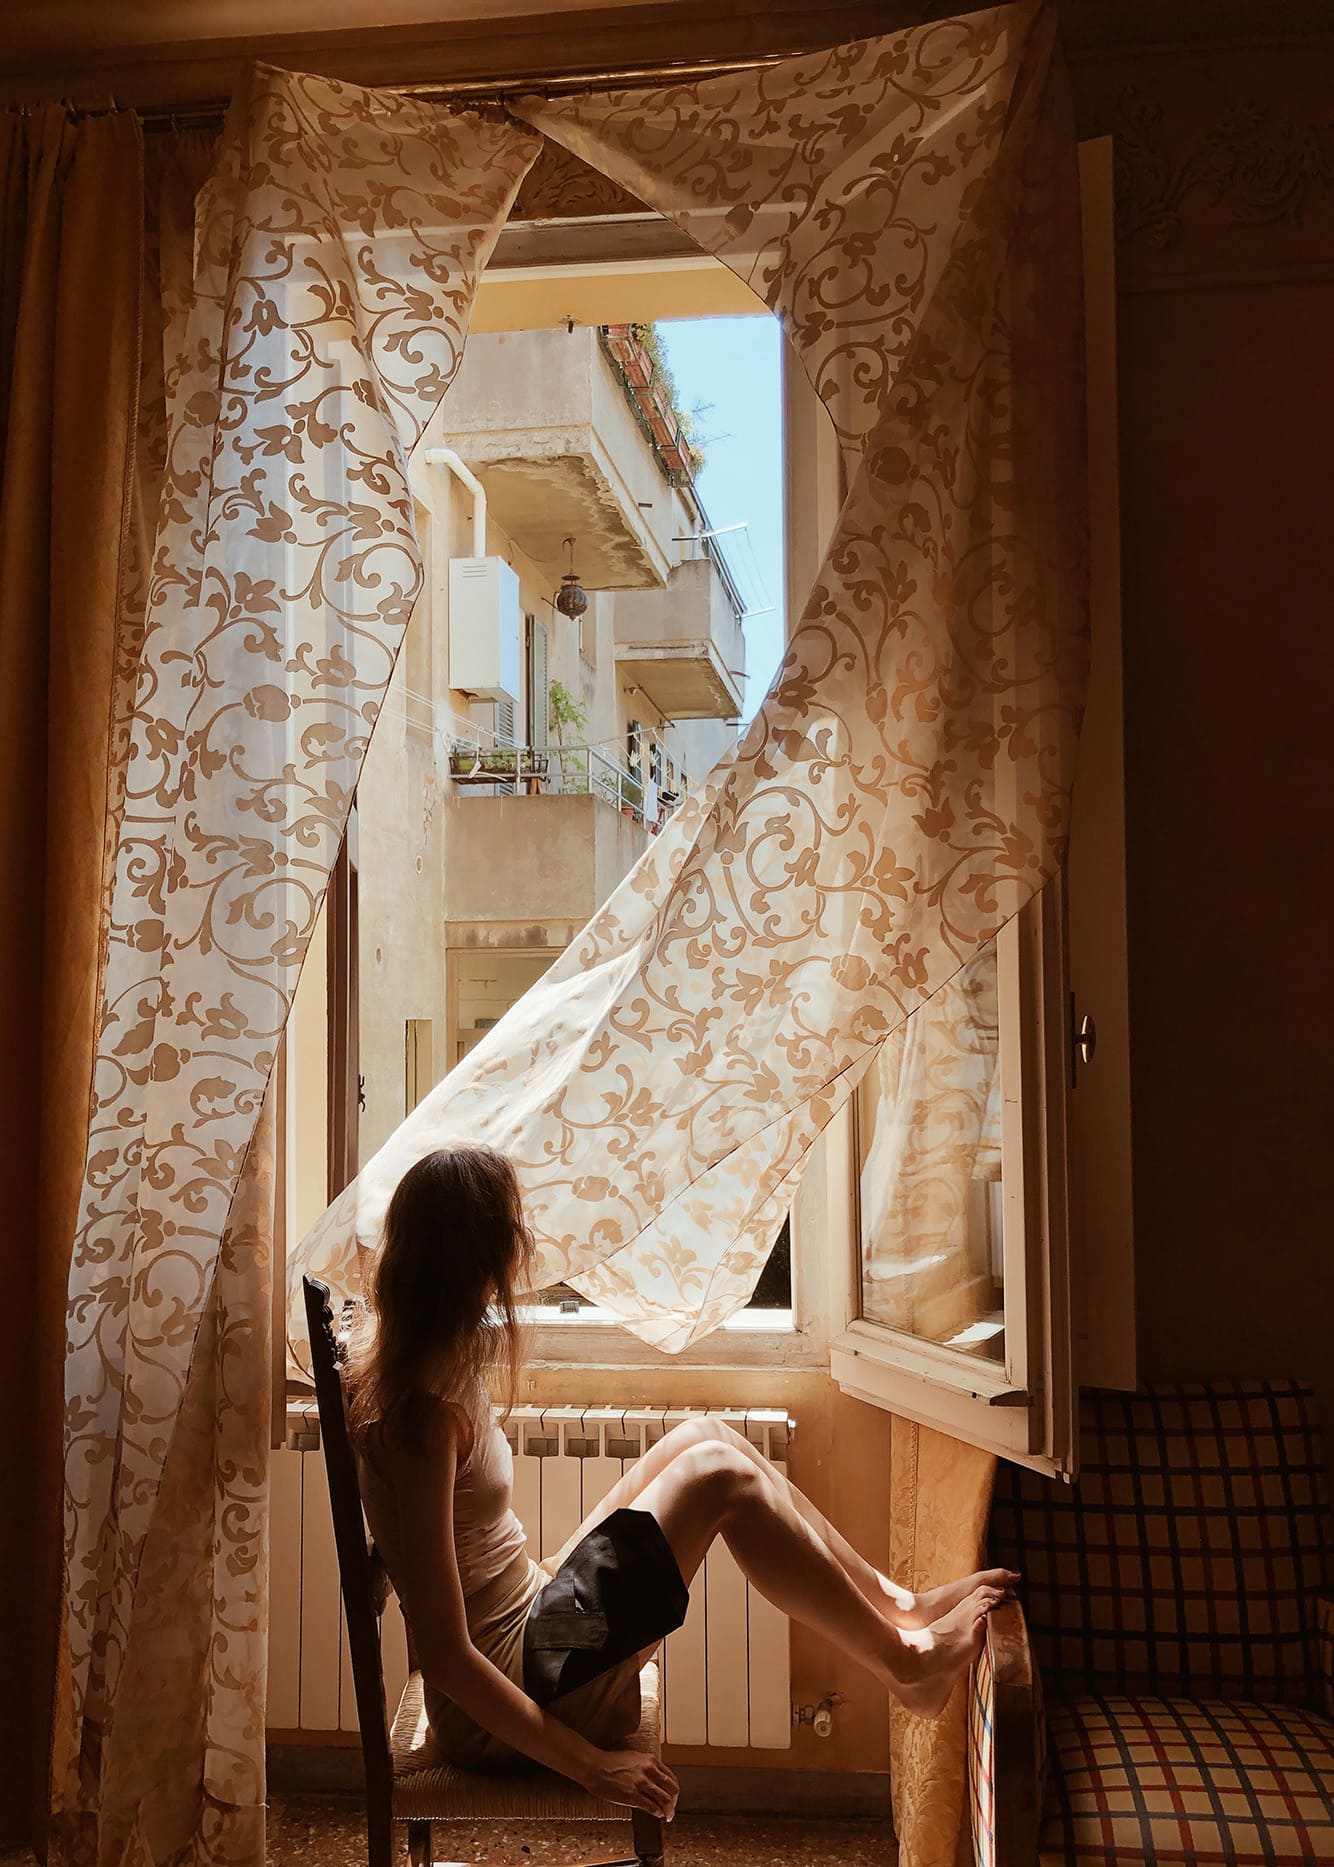 A Woman Sitting In Front Of Window